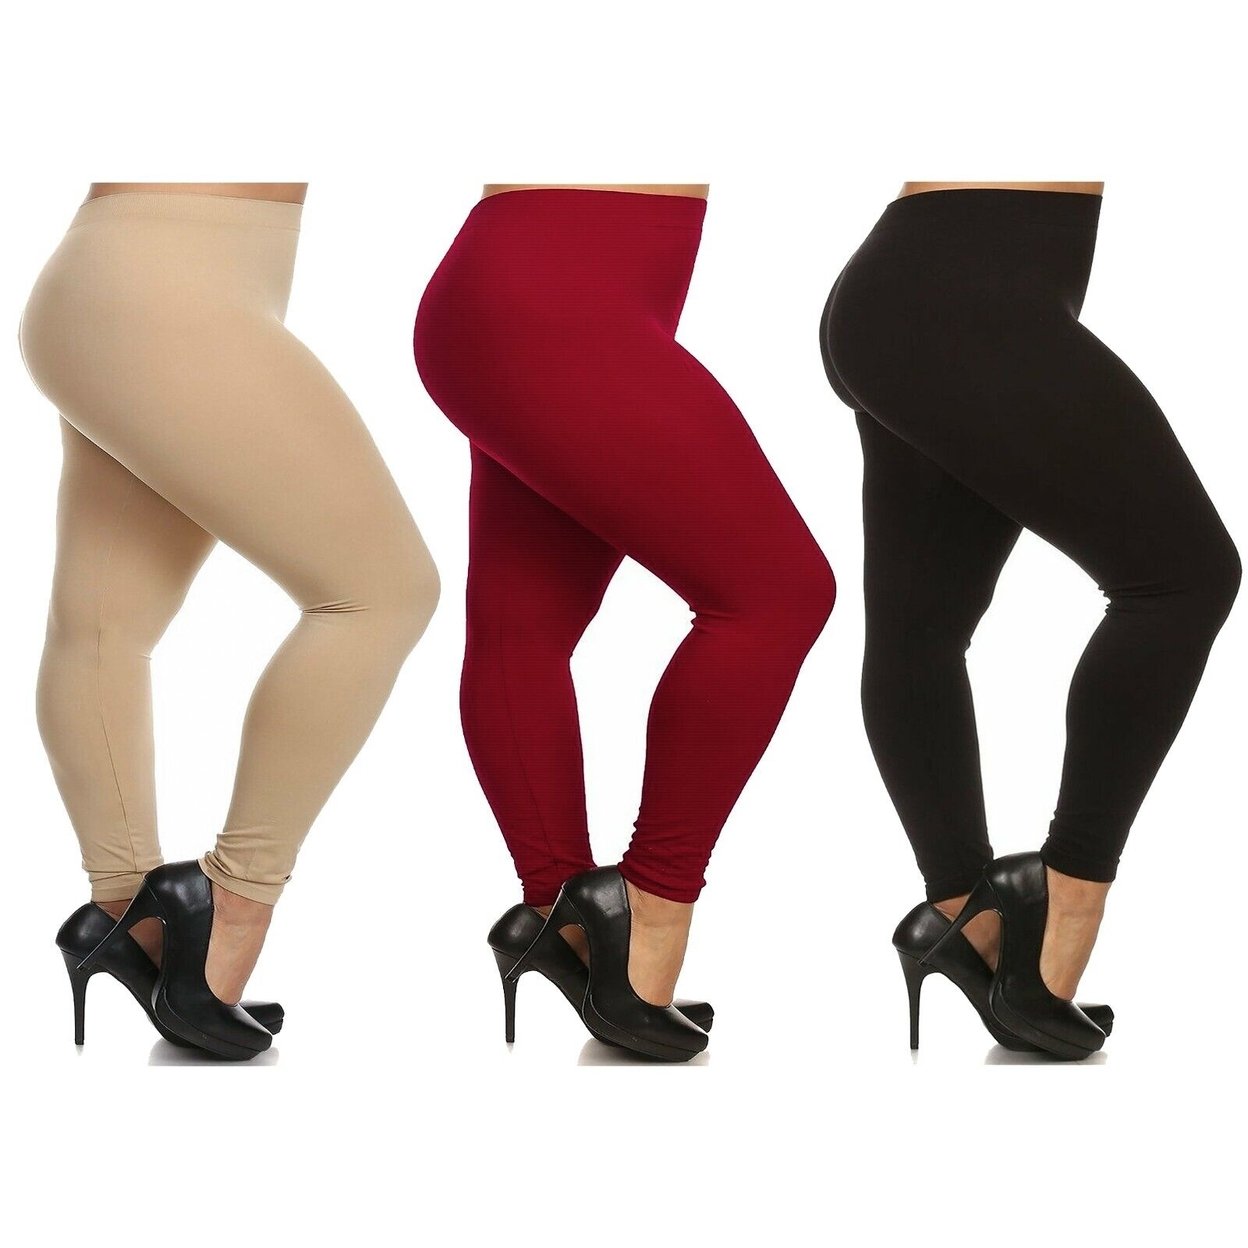 Women's Casual Ultra Soft Smooth High Waisted Athletic Active Yoga Leggings Plus Size Available - Red, 3x